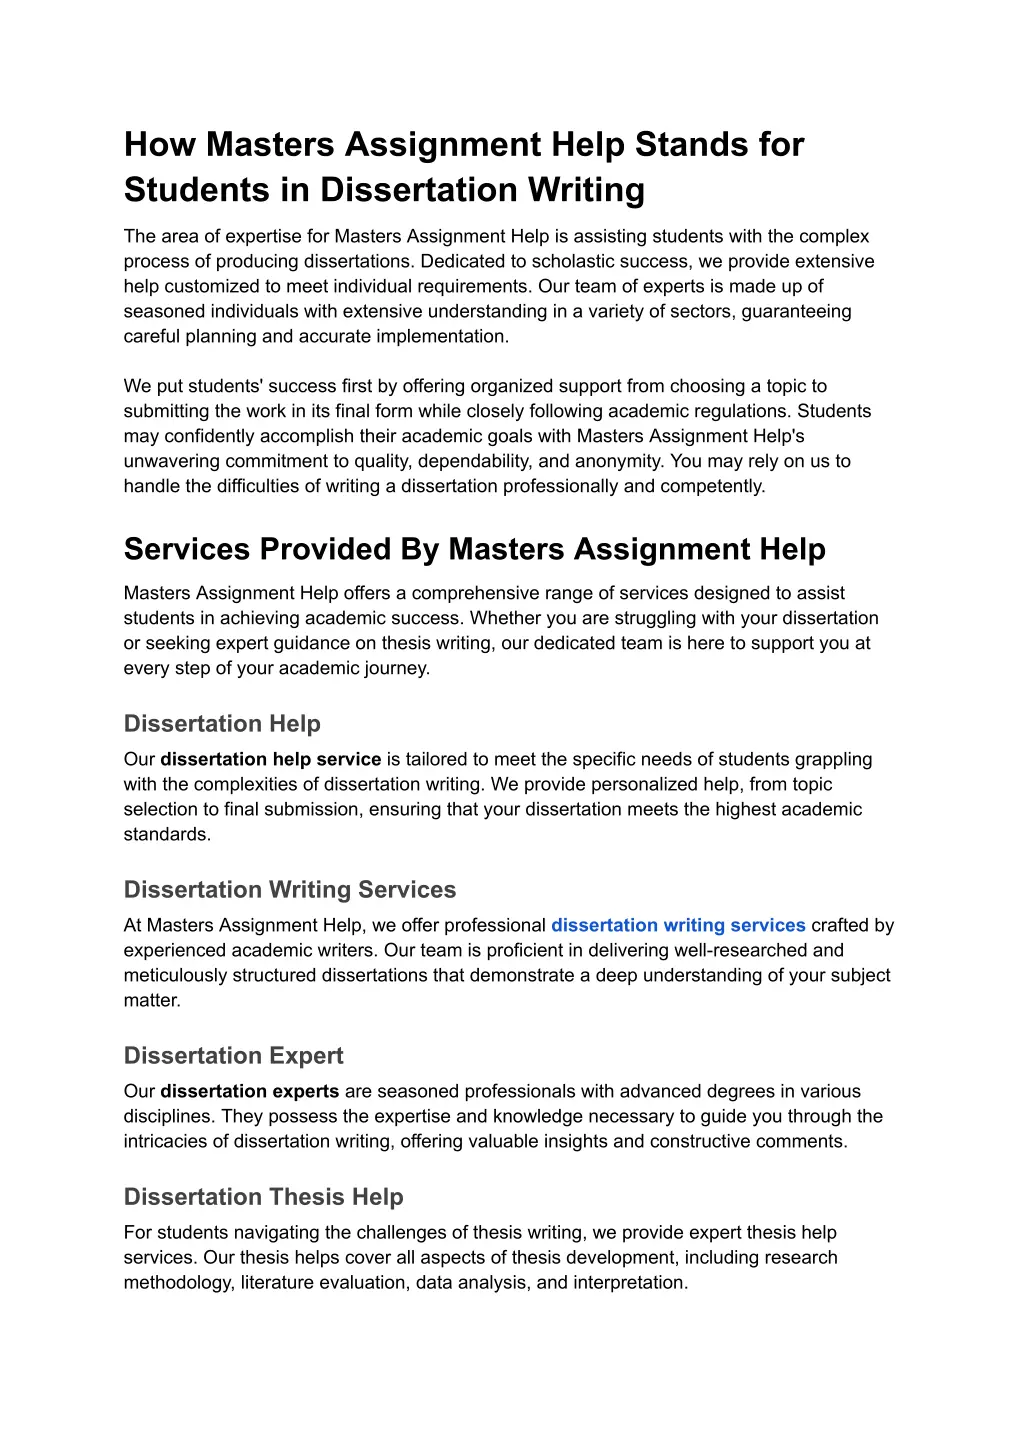 how masters assignment help stands for students